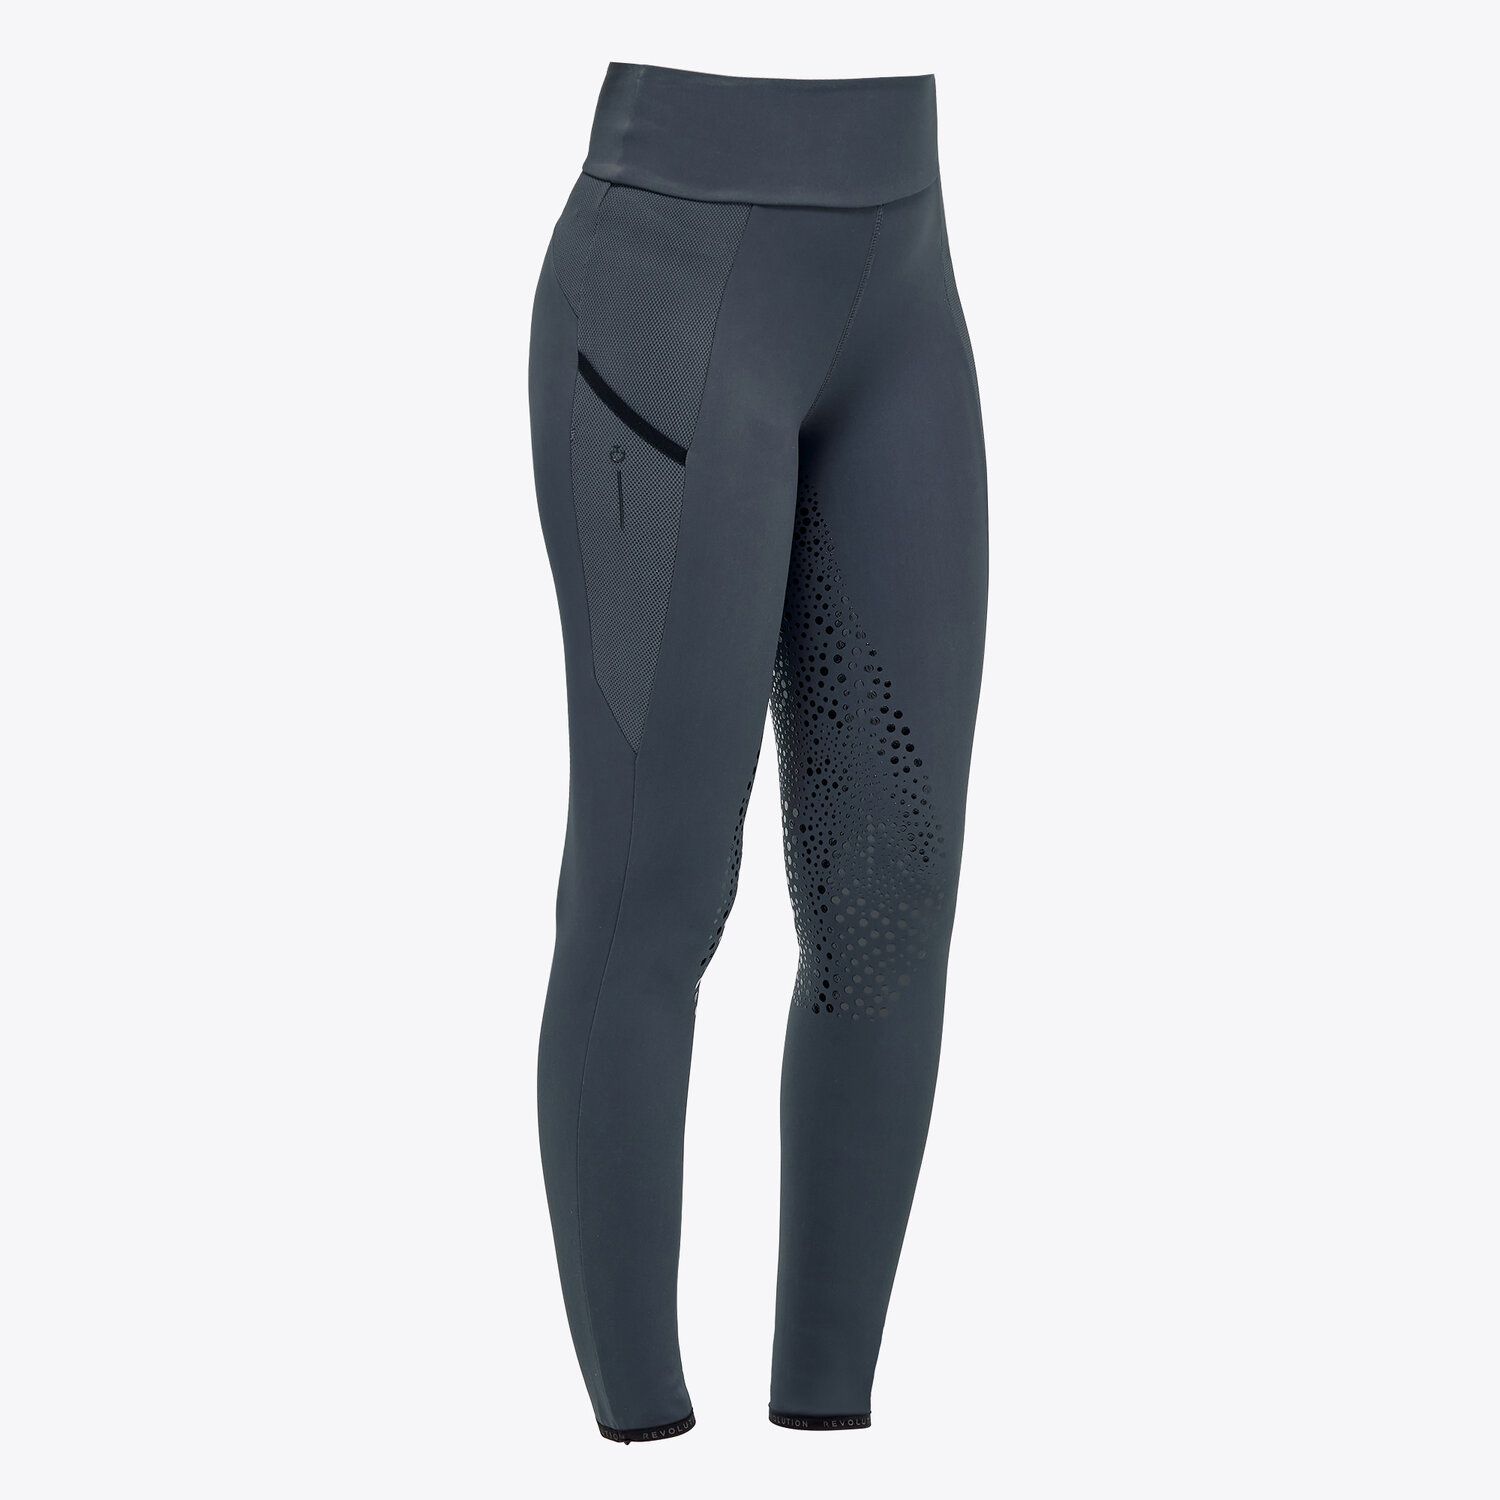 Cavalleria Toscana Women’s breeches with silicone grip CHARCOAL GREY-2